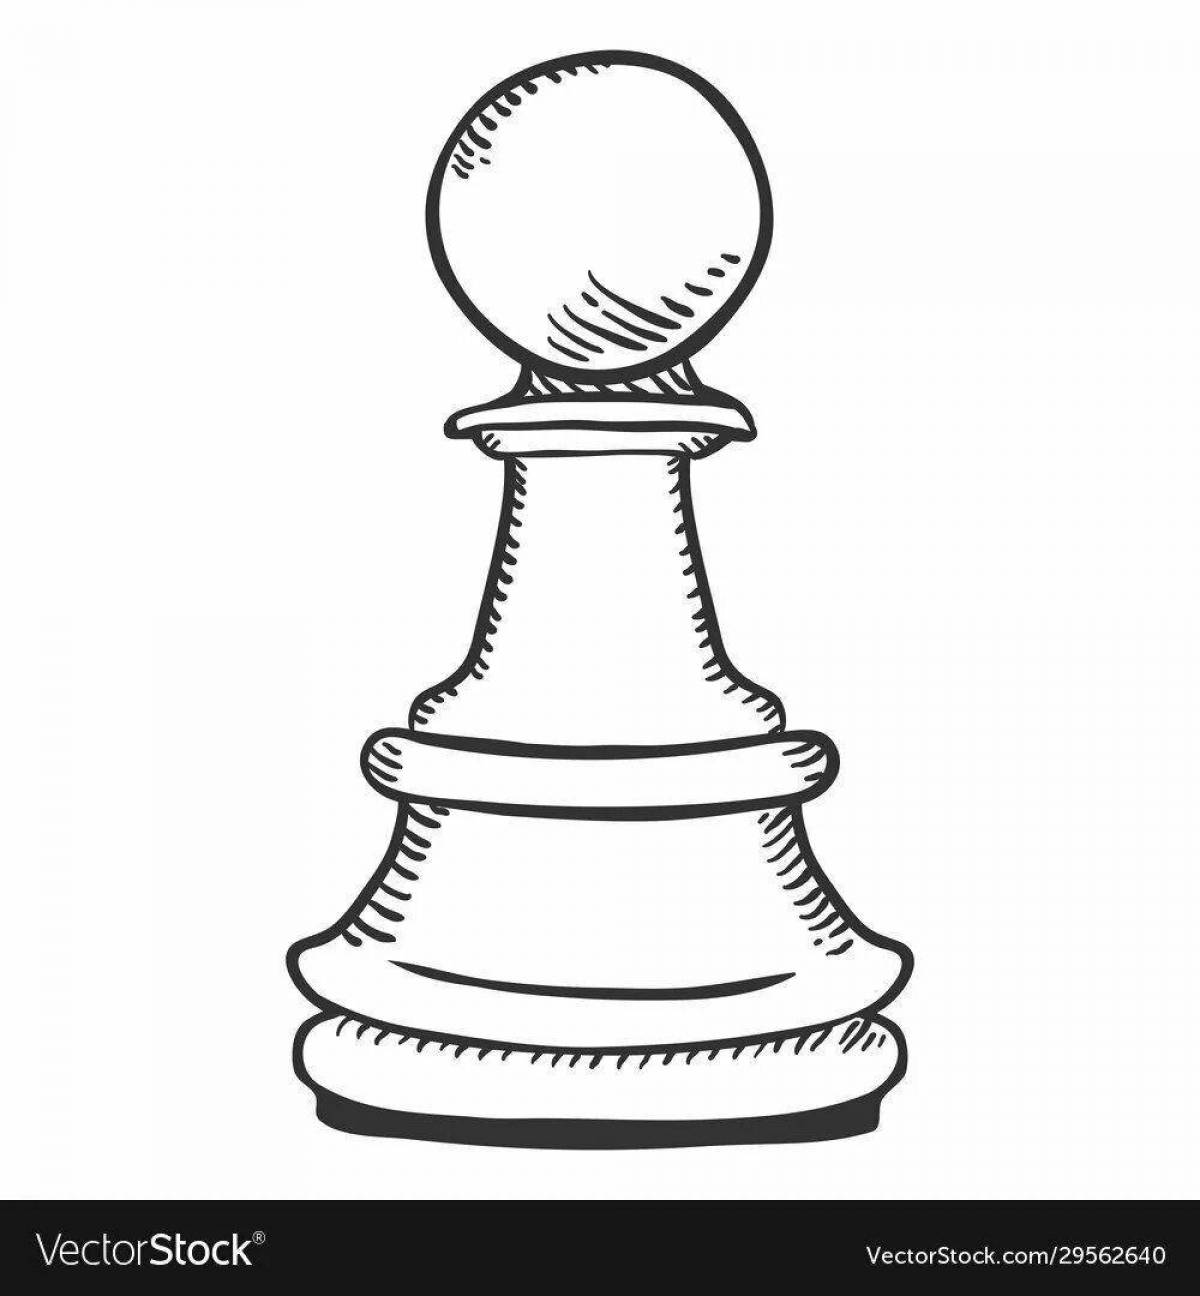 Coloring page unusual chess pieces